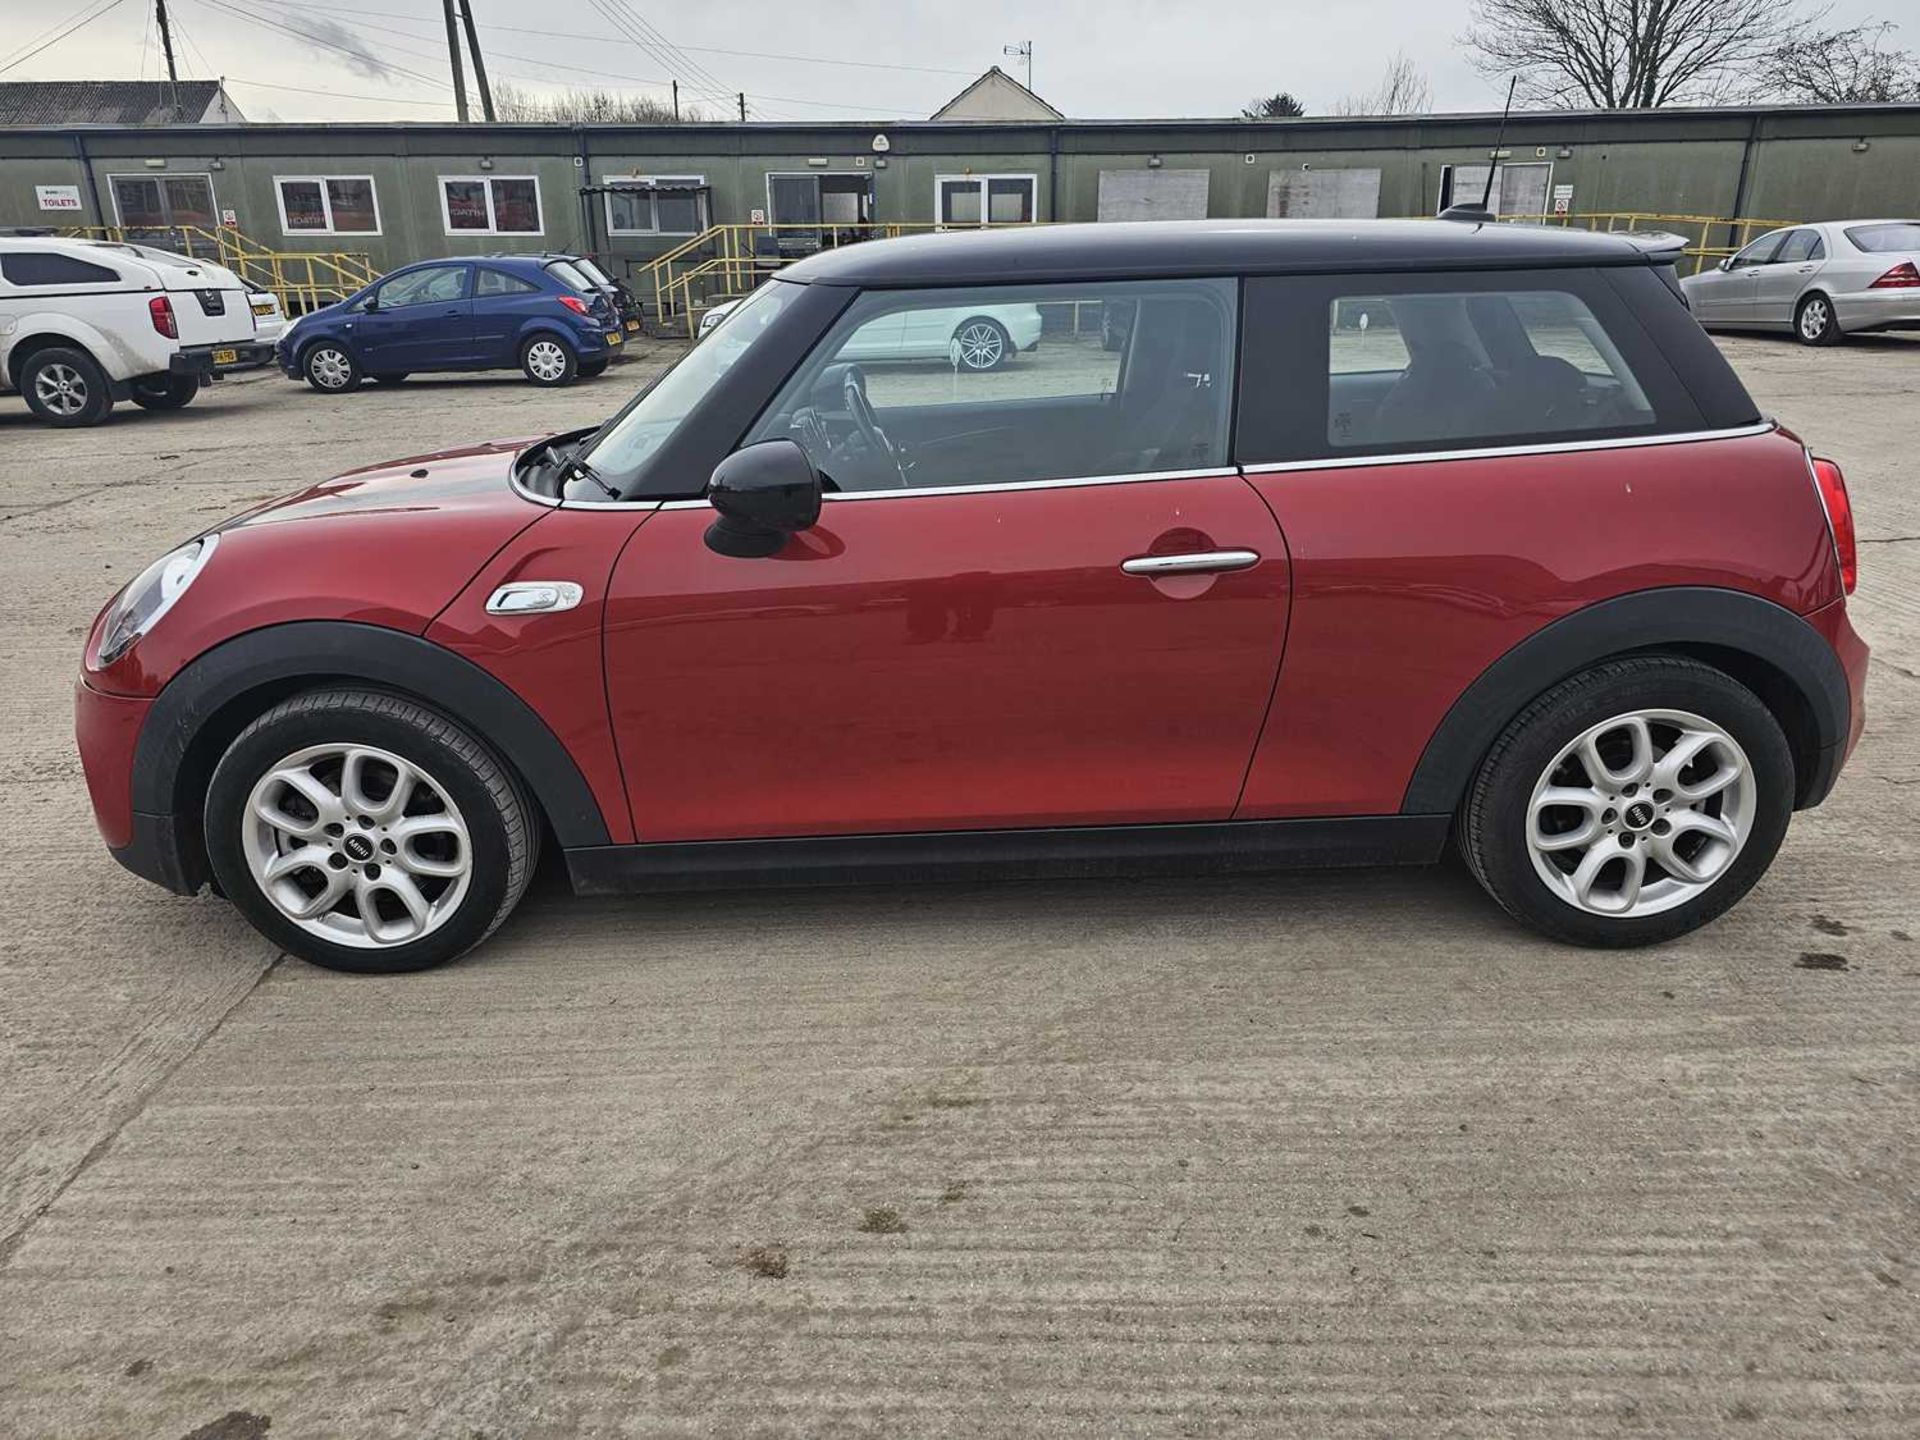 2015 Mini Cooper SD, 6 Speed, Half Leather, A/C (Reg. Docs. Available, Tested 01/25) - Image 8 of 29